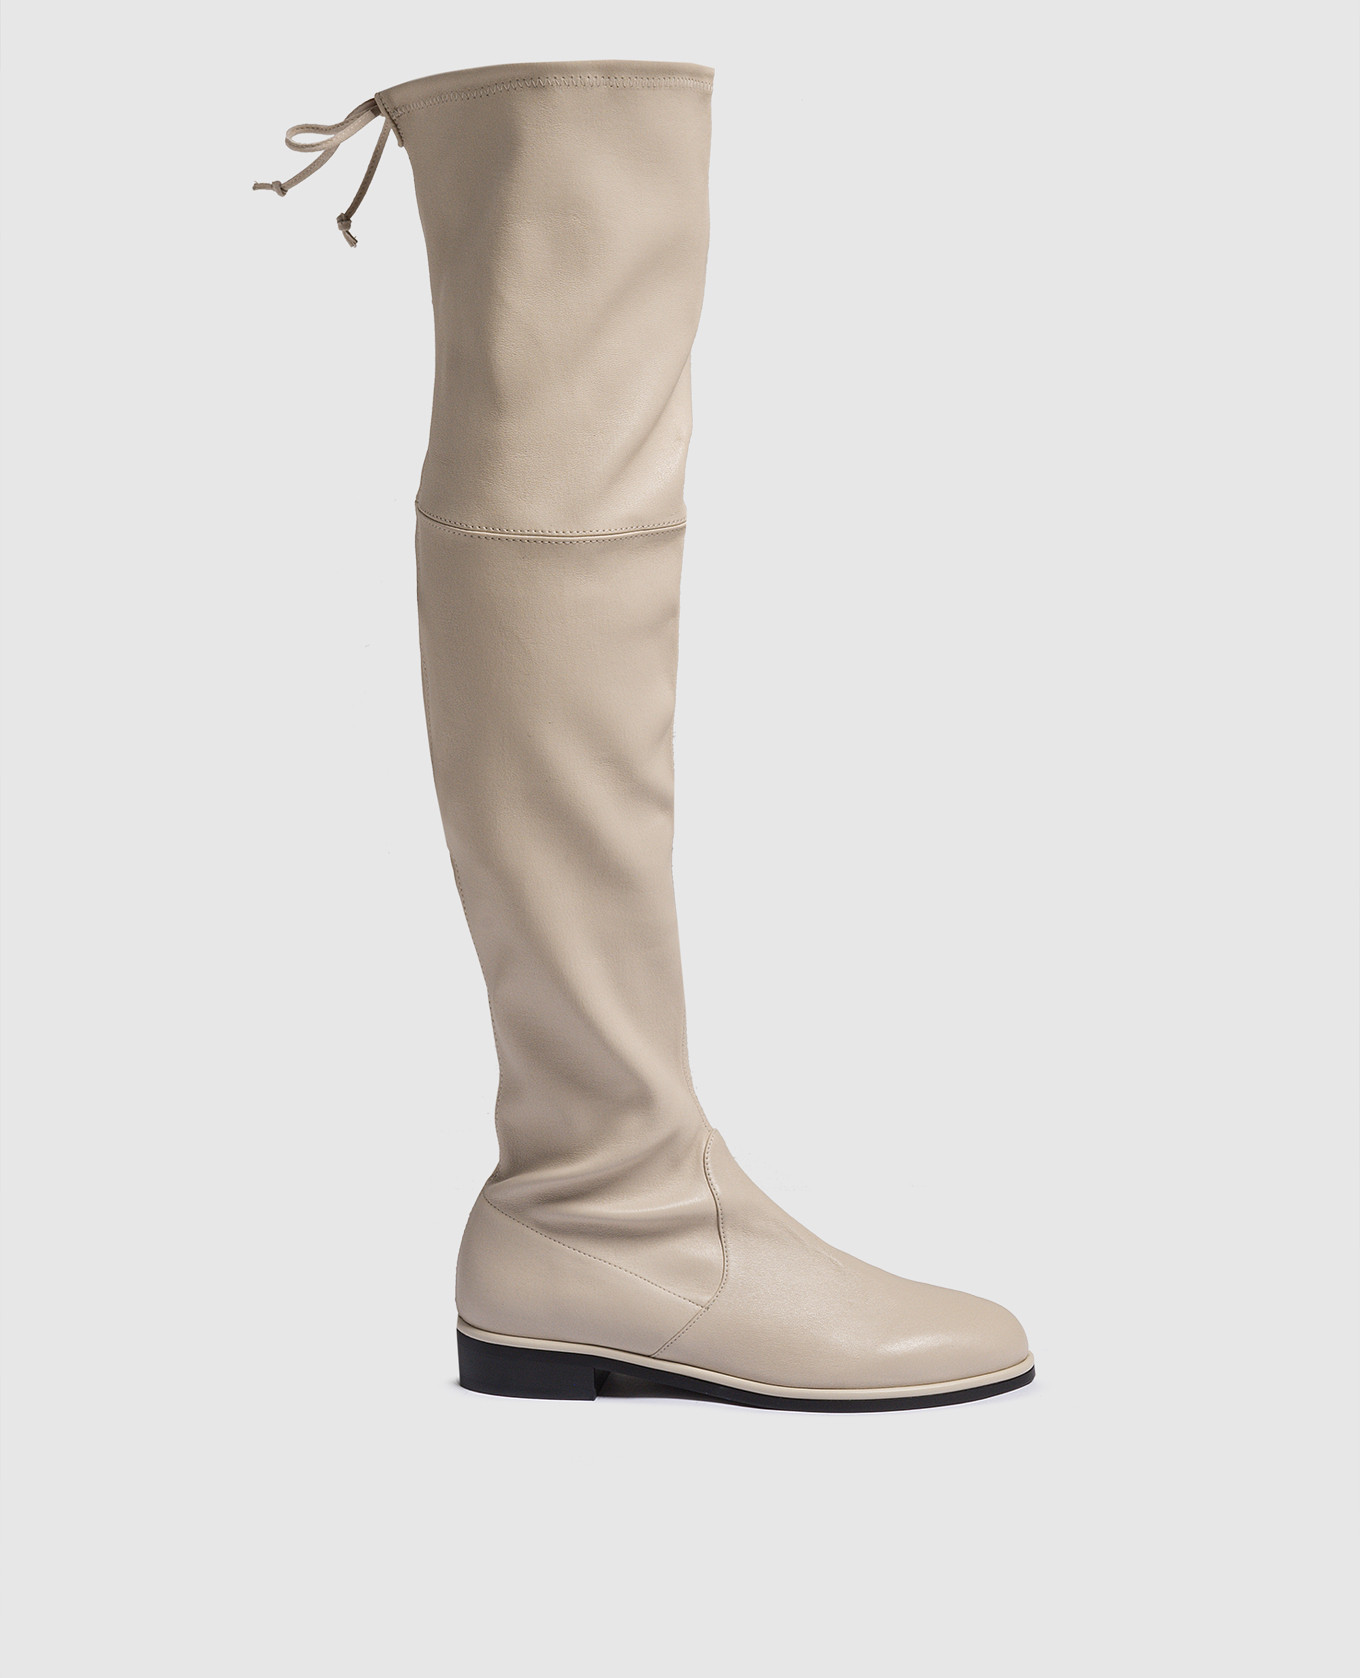 Lowland Bold beige leather ankle boots with drawstring